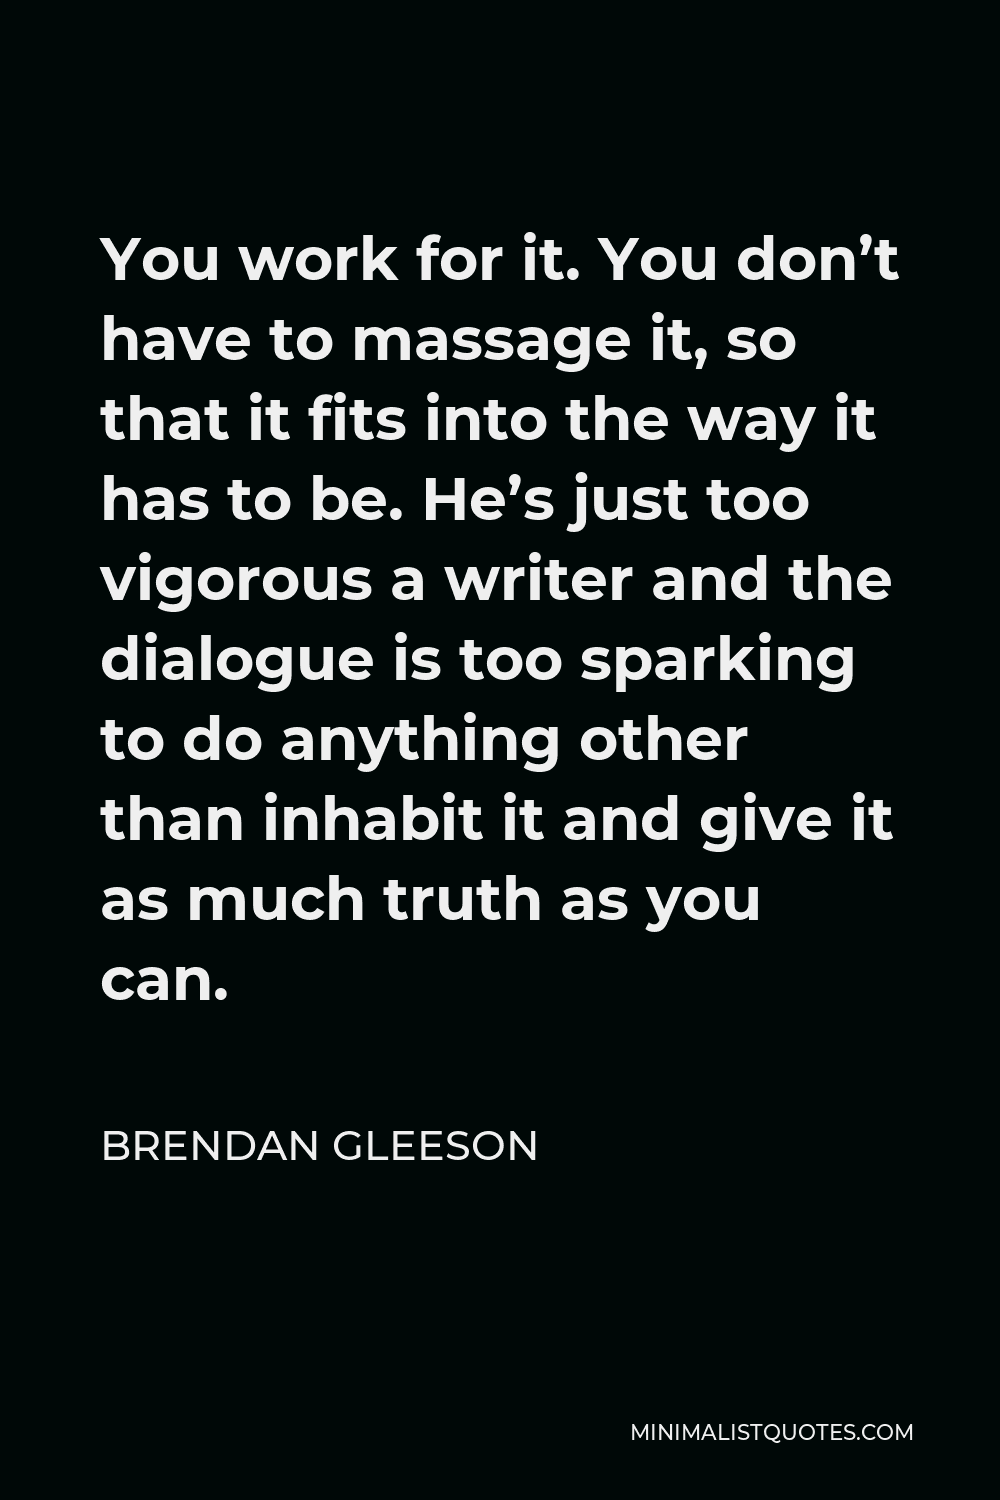 Brendan Gleeson Quote - You work for it. You don’t have to massage it, so that it fits into the way it has to be. He’s just too vigorous a writer and the dialogue is too sparking to do anything other than inhabit it and give it as much truth as you can.